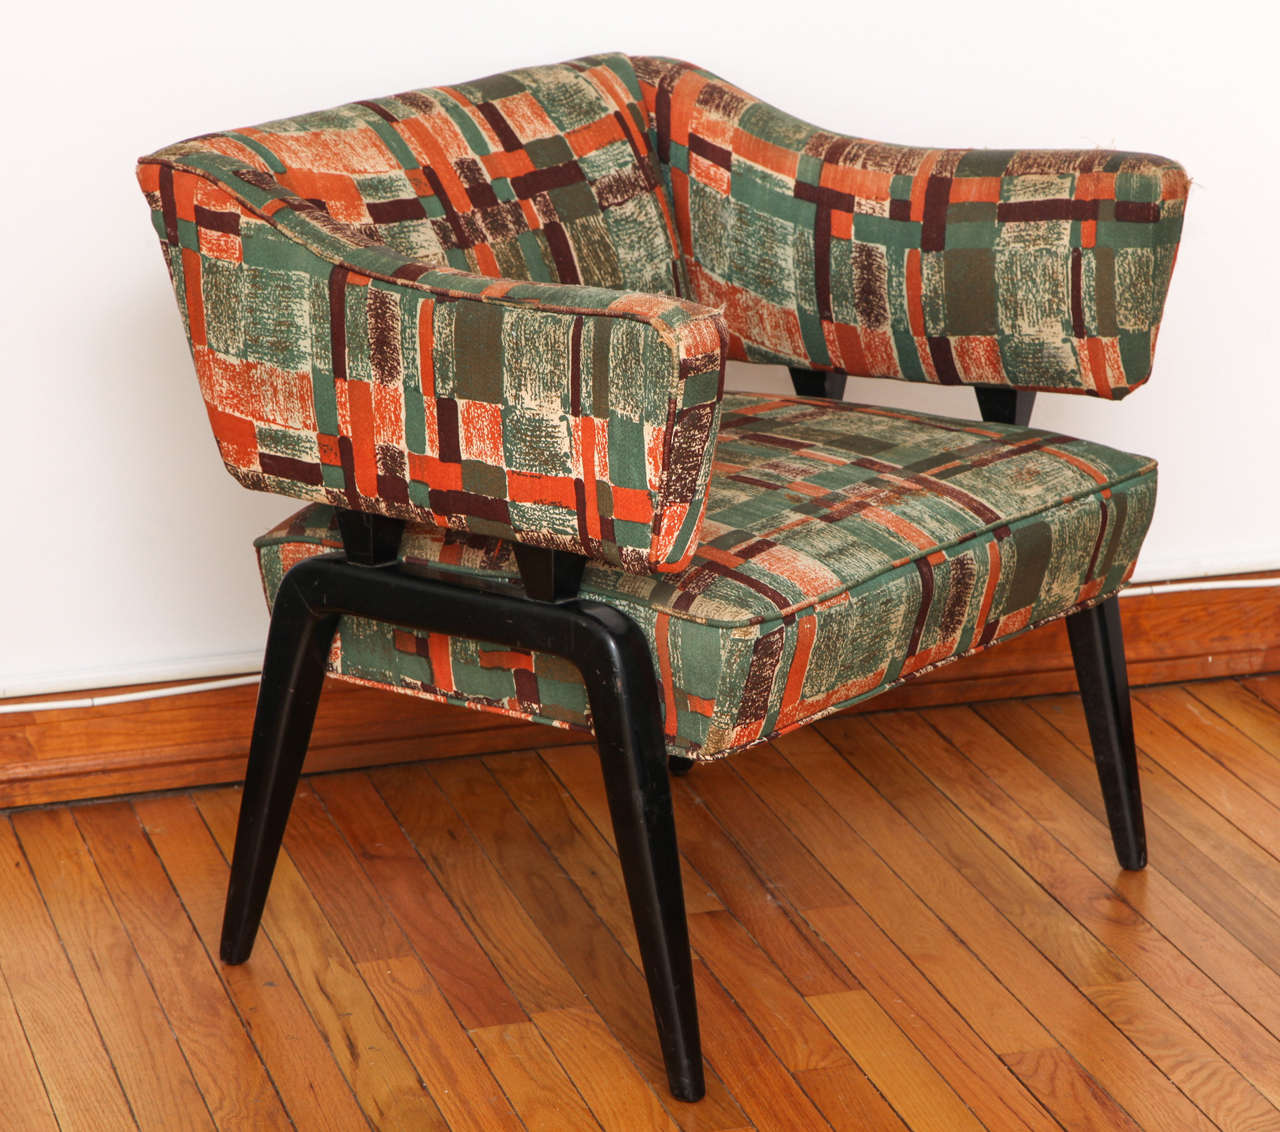 Unique 1950s armchair with a semi-floating backrest and ebonized, tapered legs. Seat height is 15.5